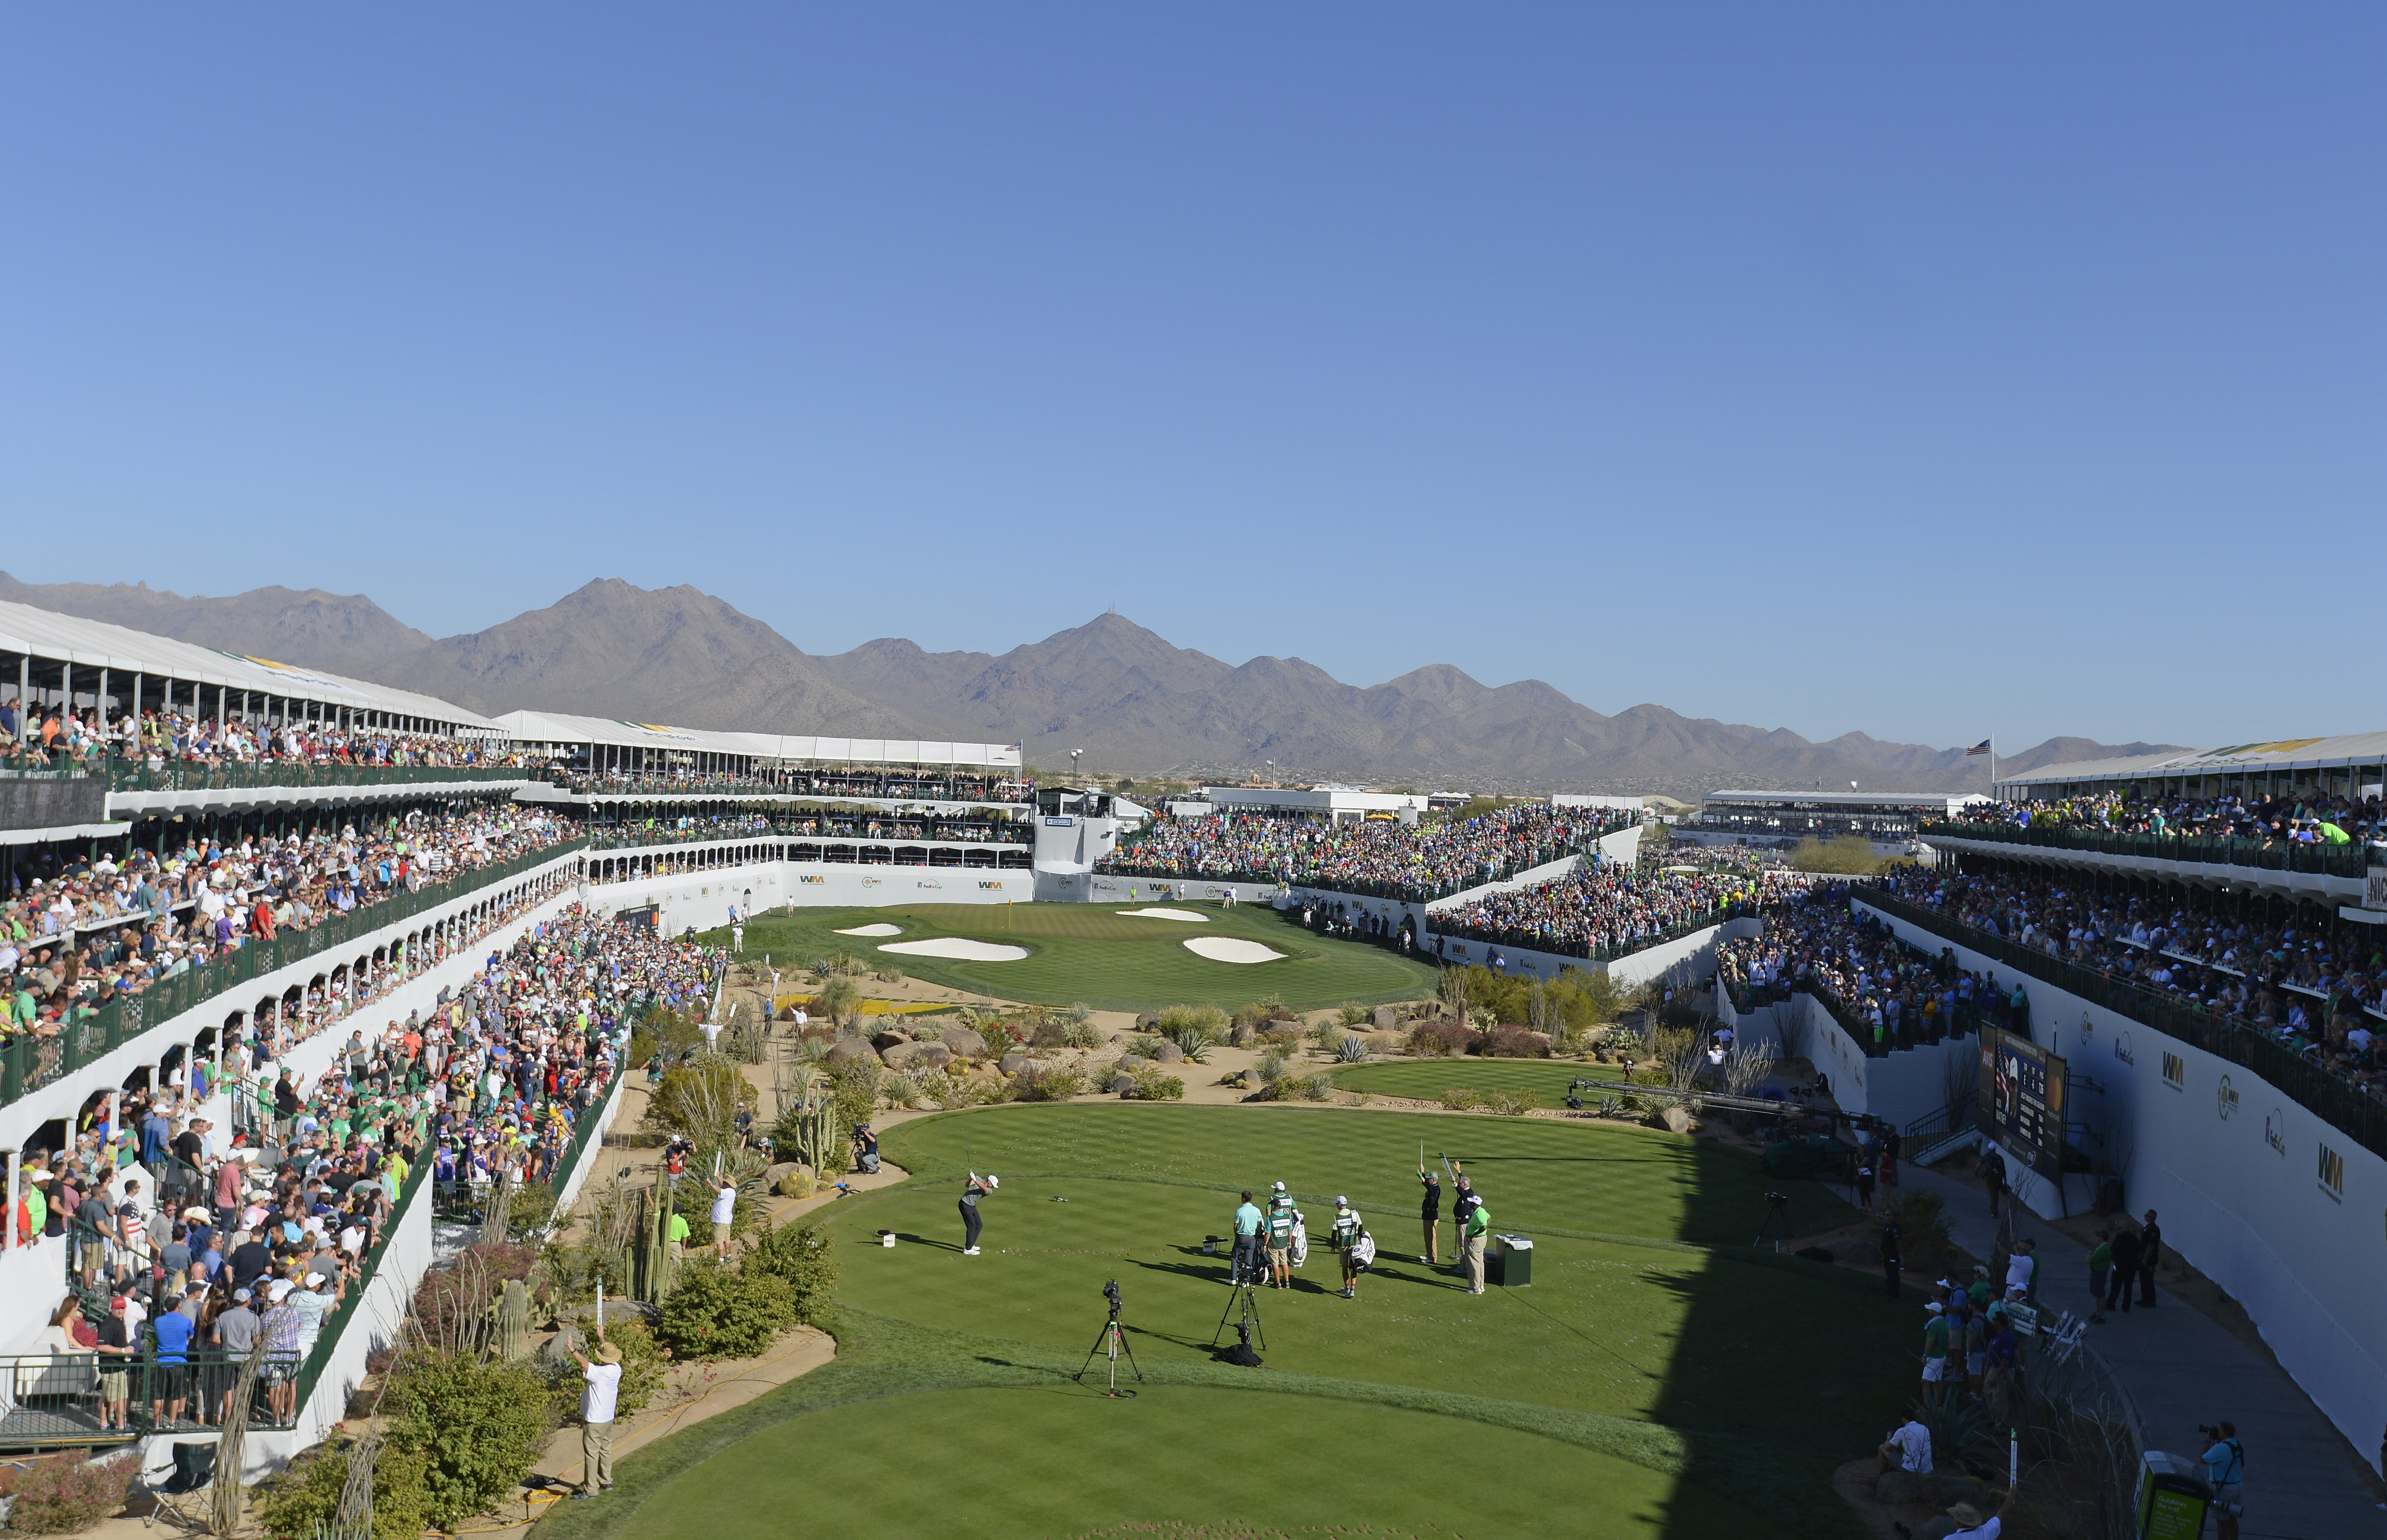 General view of the gallery on the 16th hole during the third round of the Waste Management Phoenix Open at TPC Scottsdale on February 3, 2018 in Scottsdale, Arizona. Robert Laberge/Getty Images